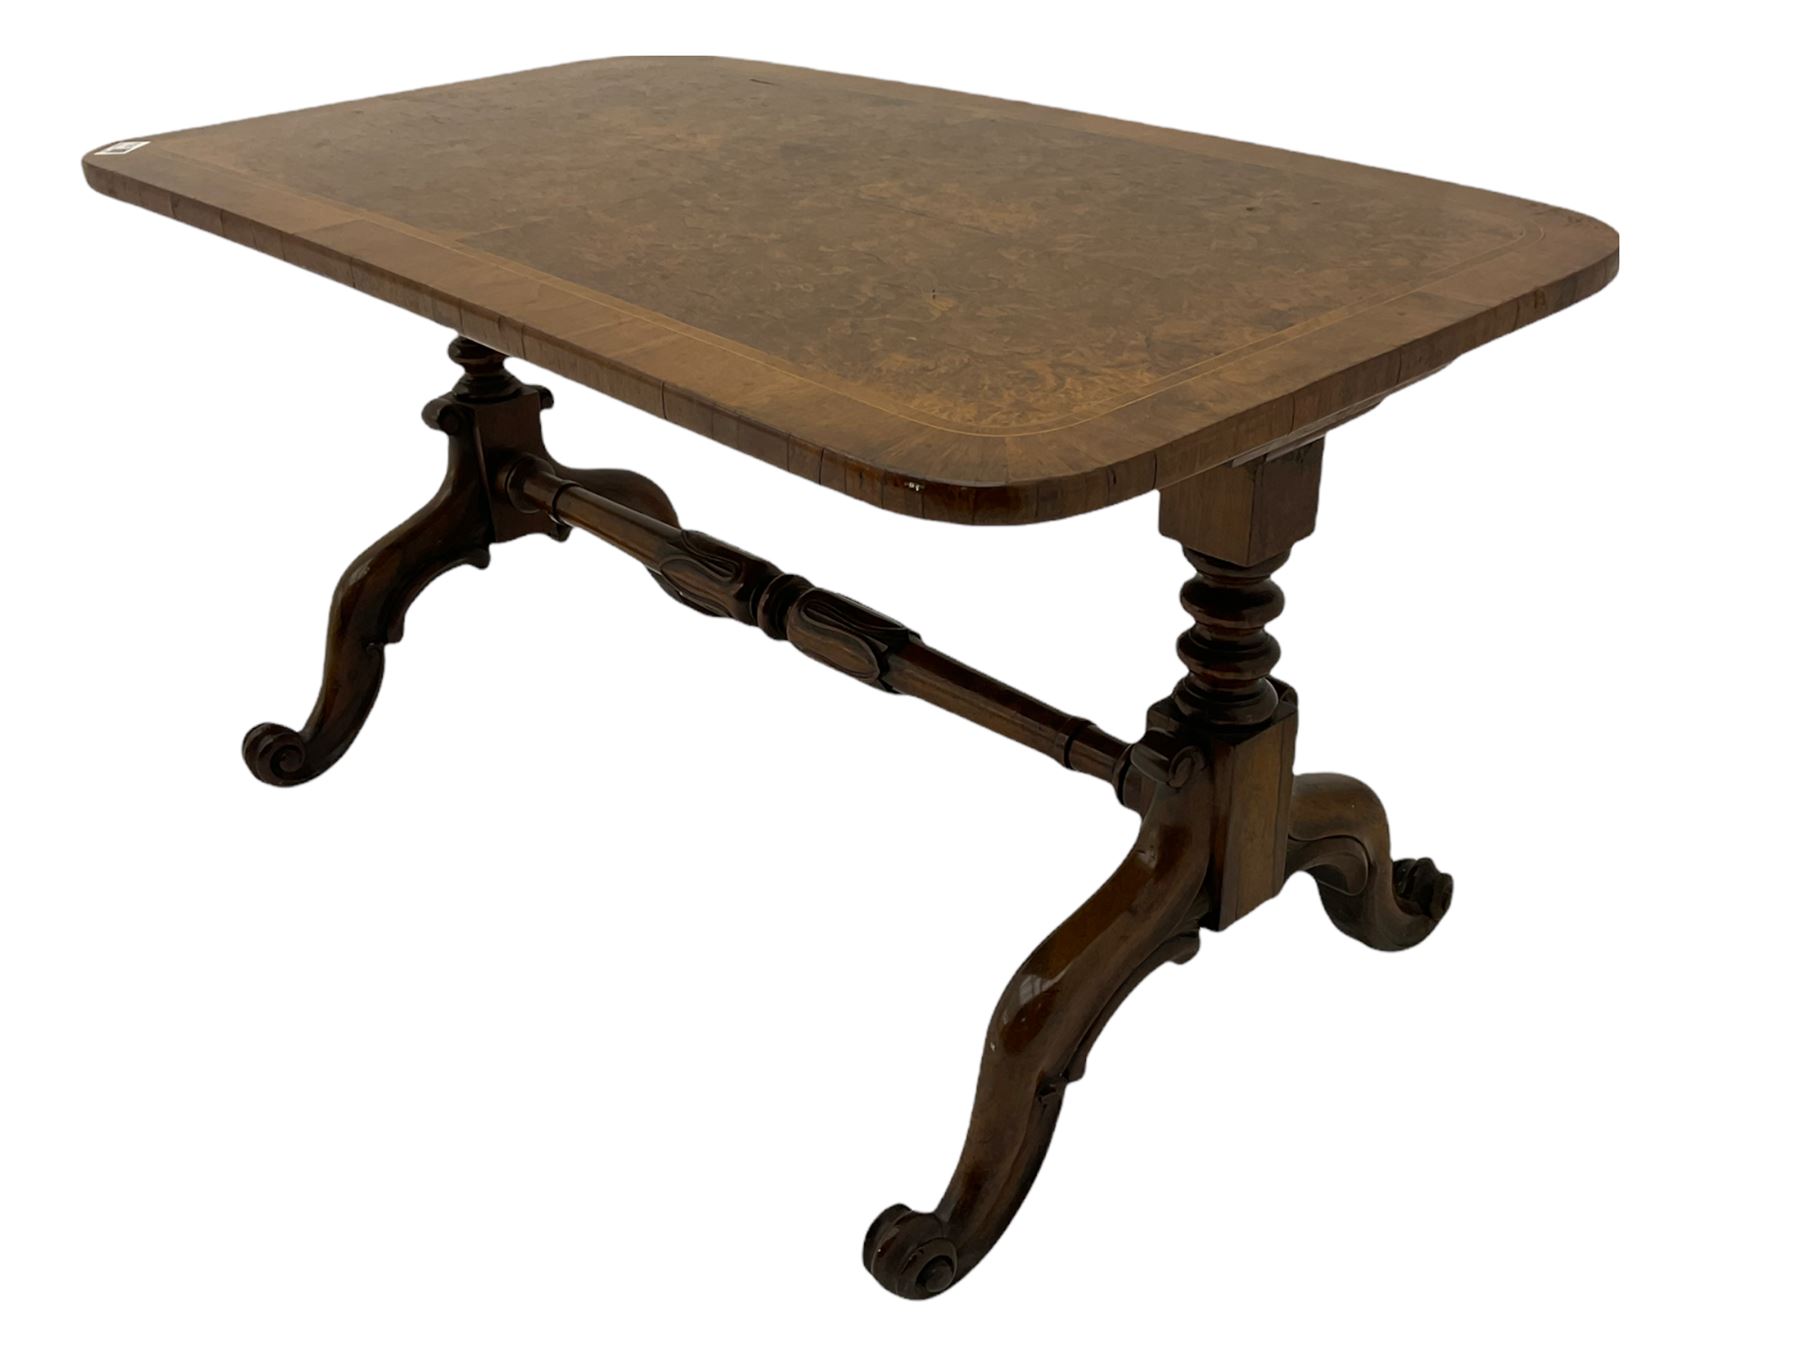 19th century and later stretcher coffee table - Image 5 of 6